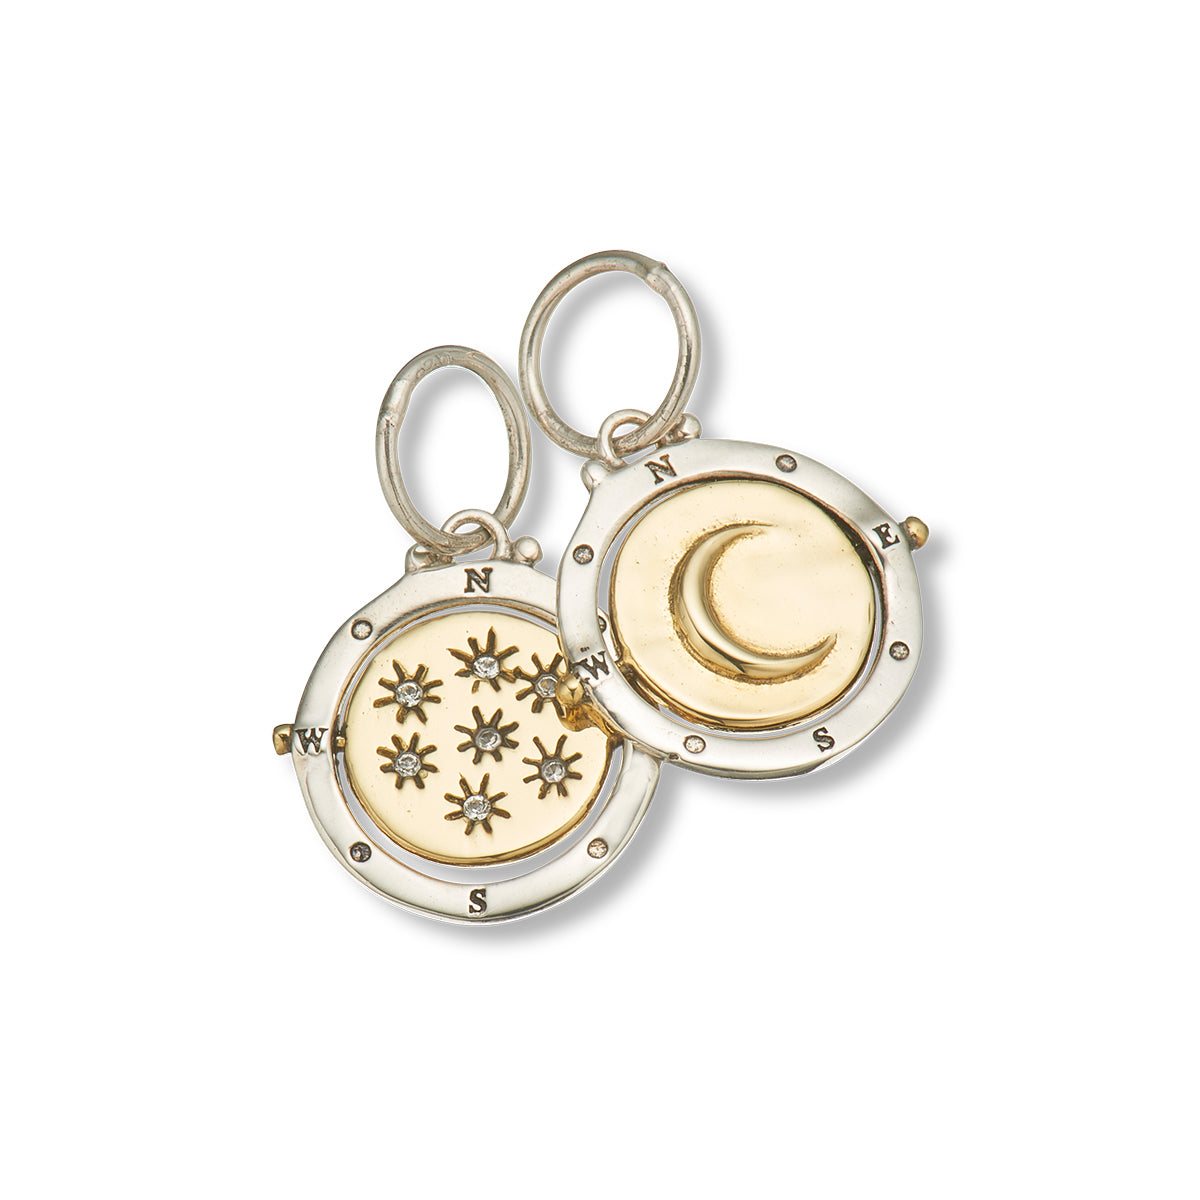 Palas Moon and stars direction spinner charm